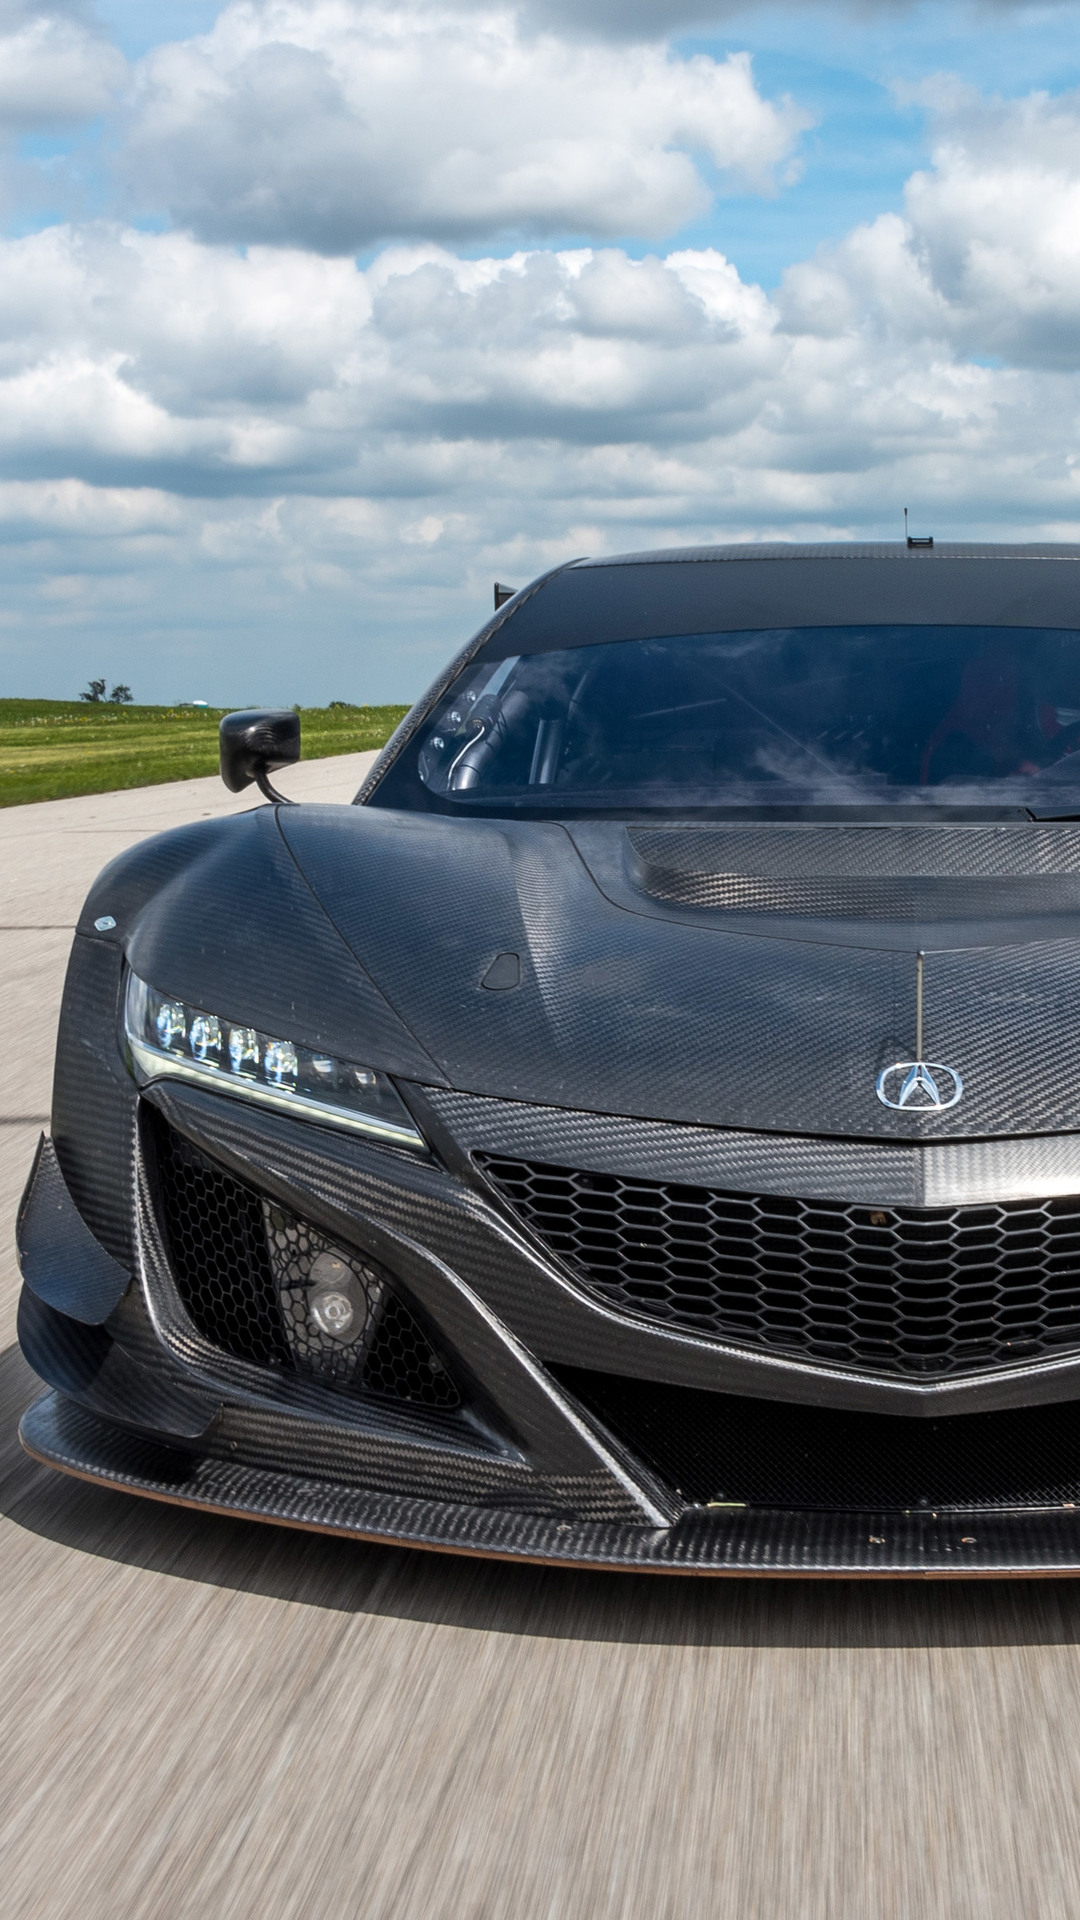 acura nsx HD wallpaper, background